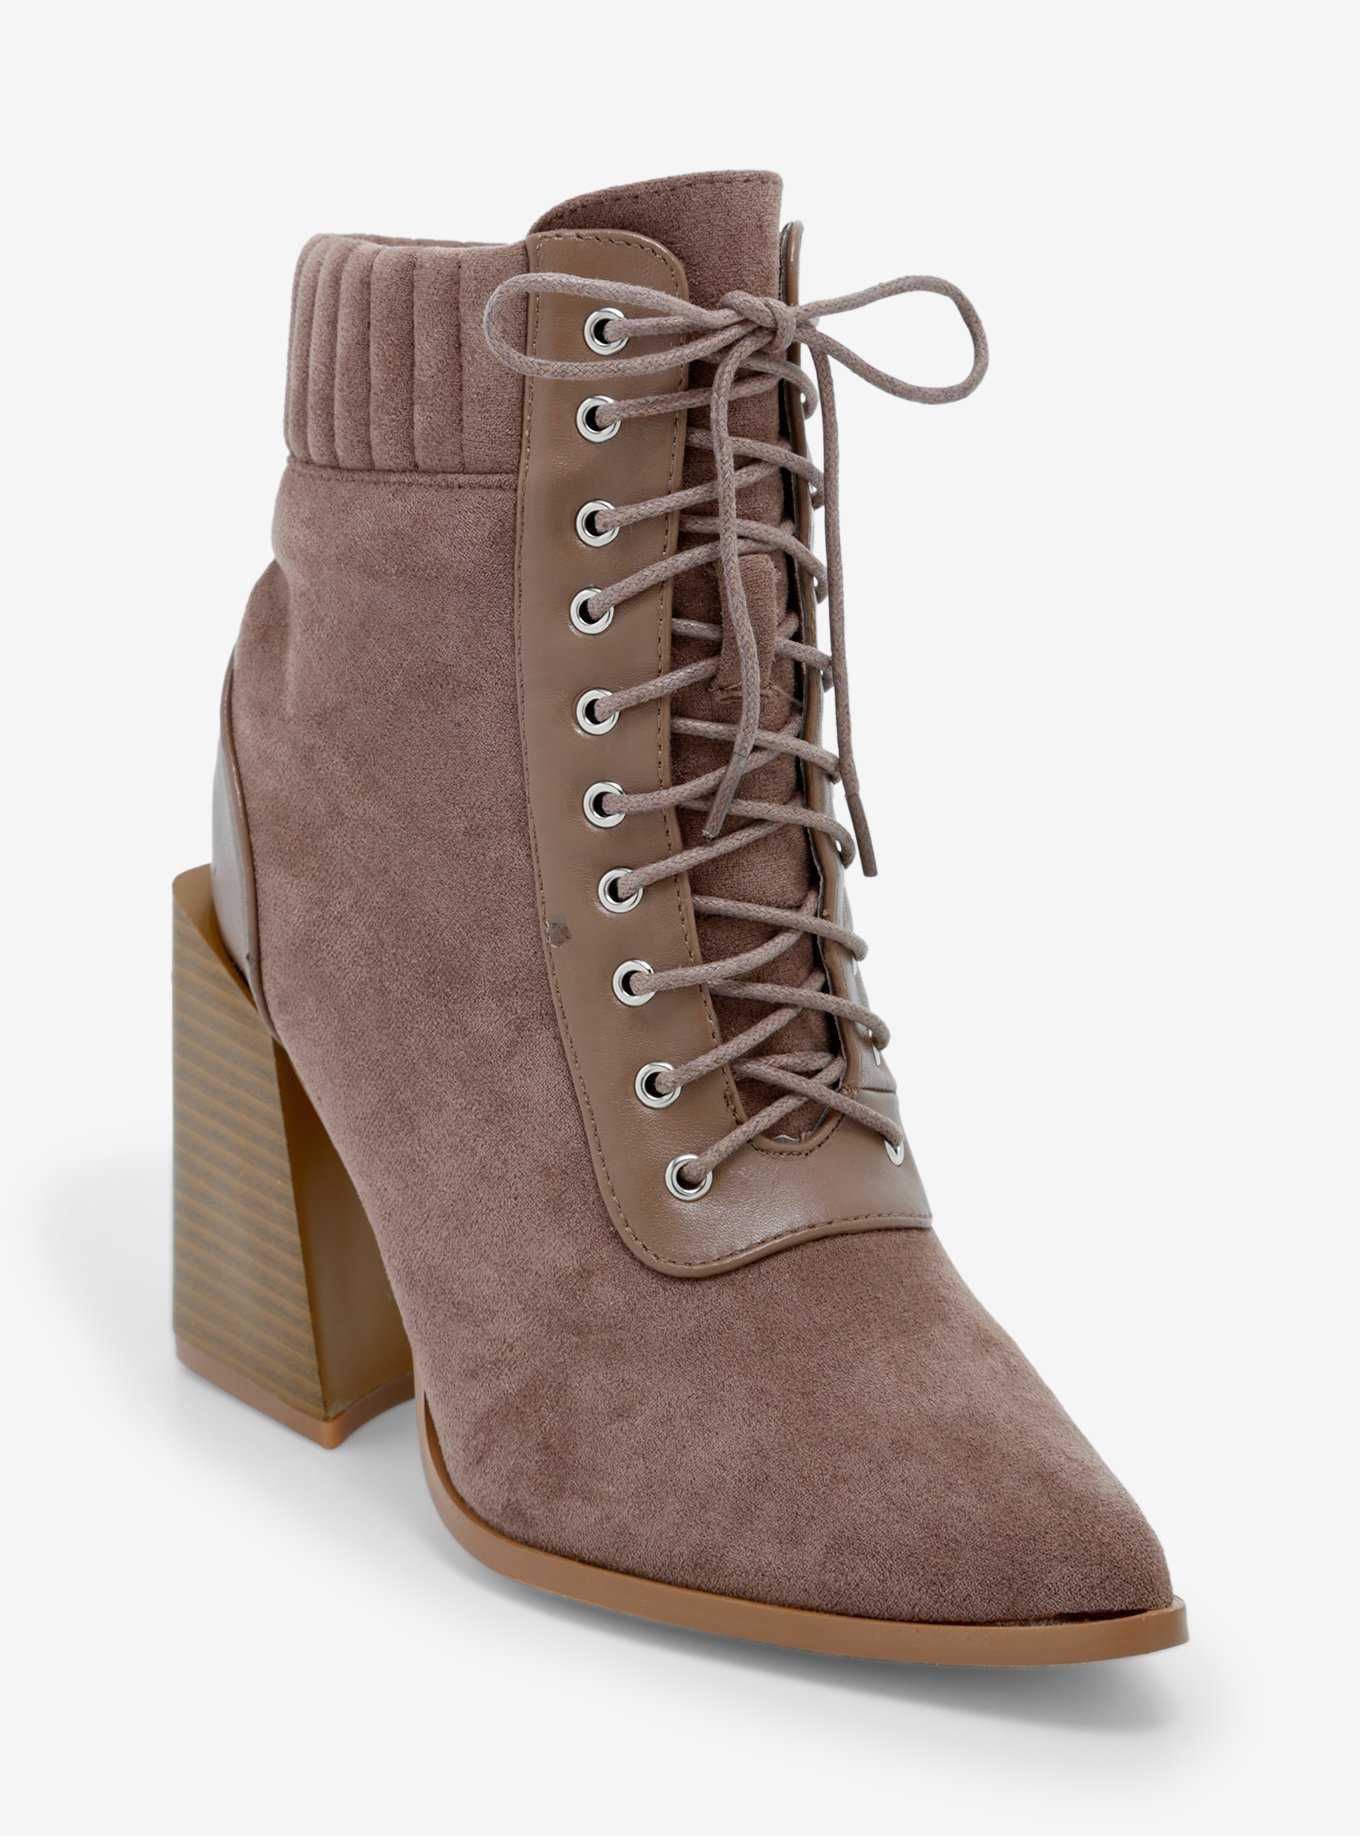 Yoki Beige Lace-Up Suede Ankle Boots, , hi-res